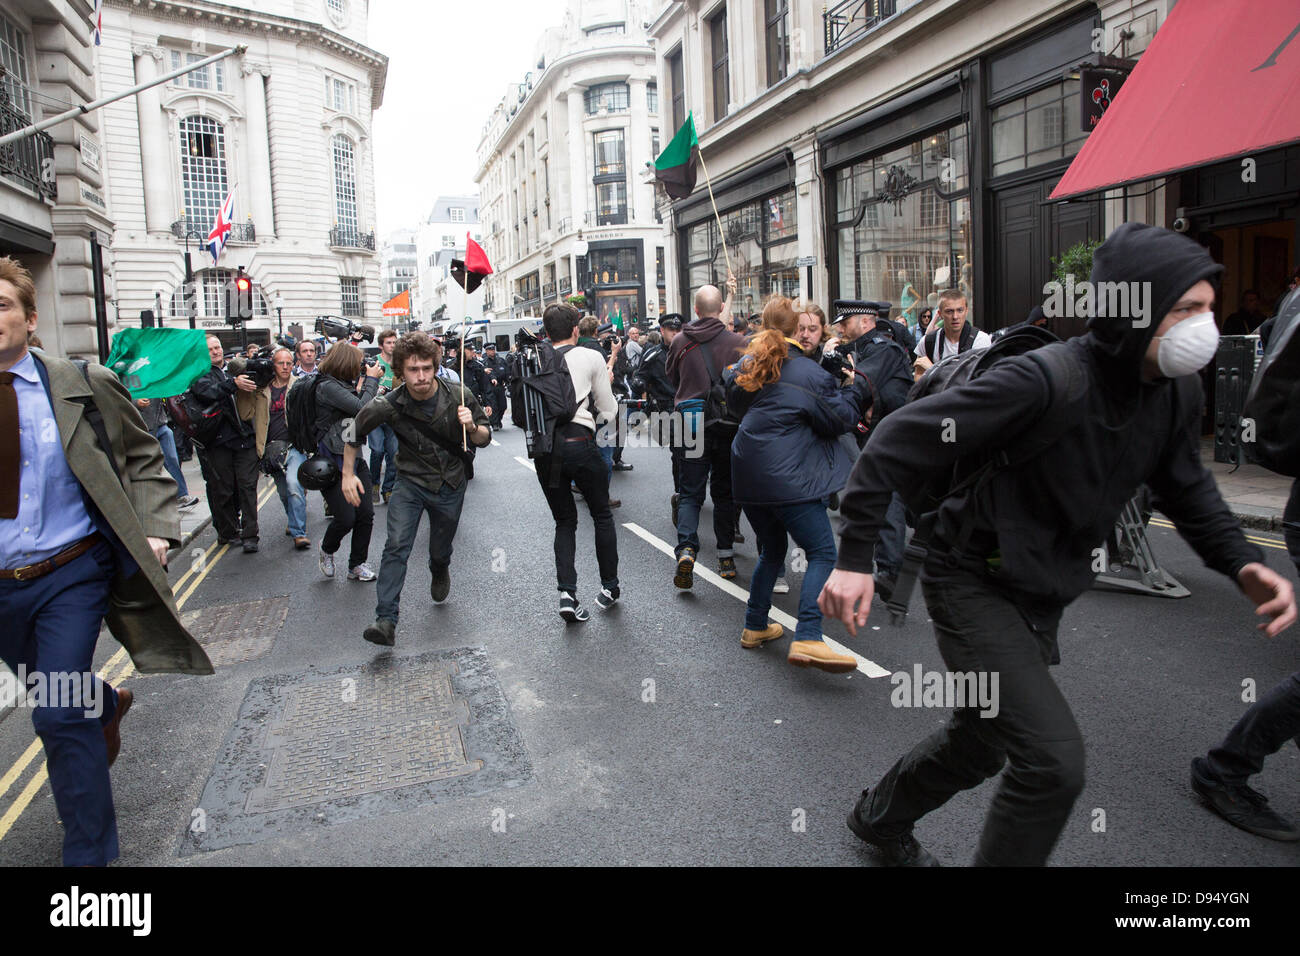 London, UK. 11th June 2013. Anti G8 protesters in scuffles with  police. Credit:  Lydia Pagoni/Alamy Live News Stock Photo